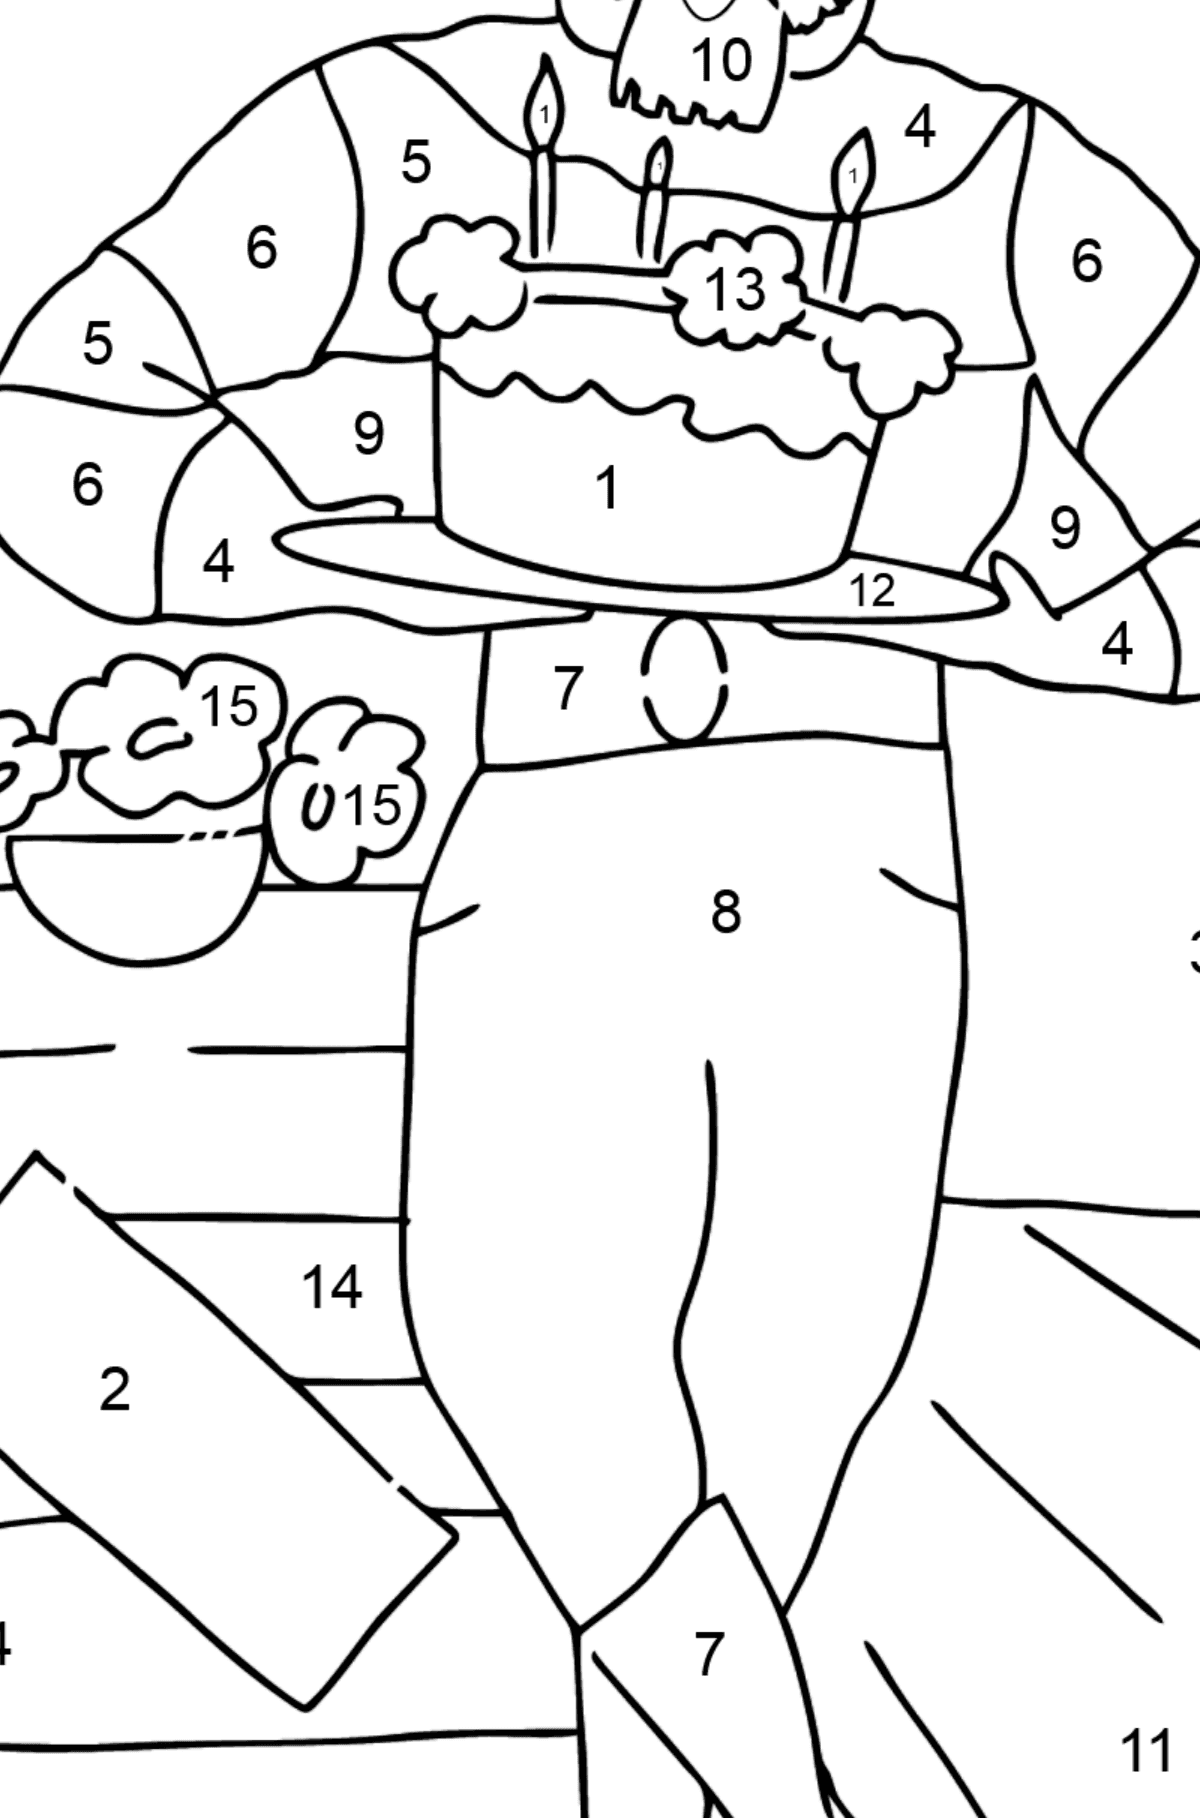 Coloring Page - A Pirate is Waiting for Guests - Coloring by Numbers for Kids